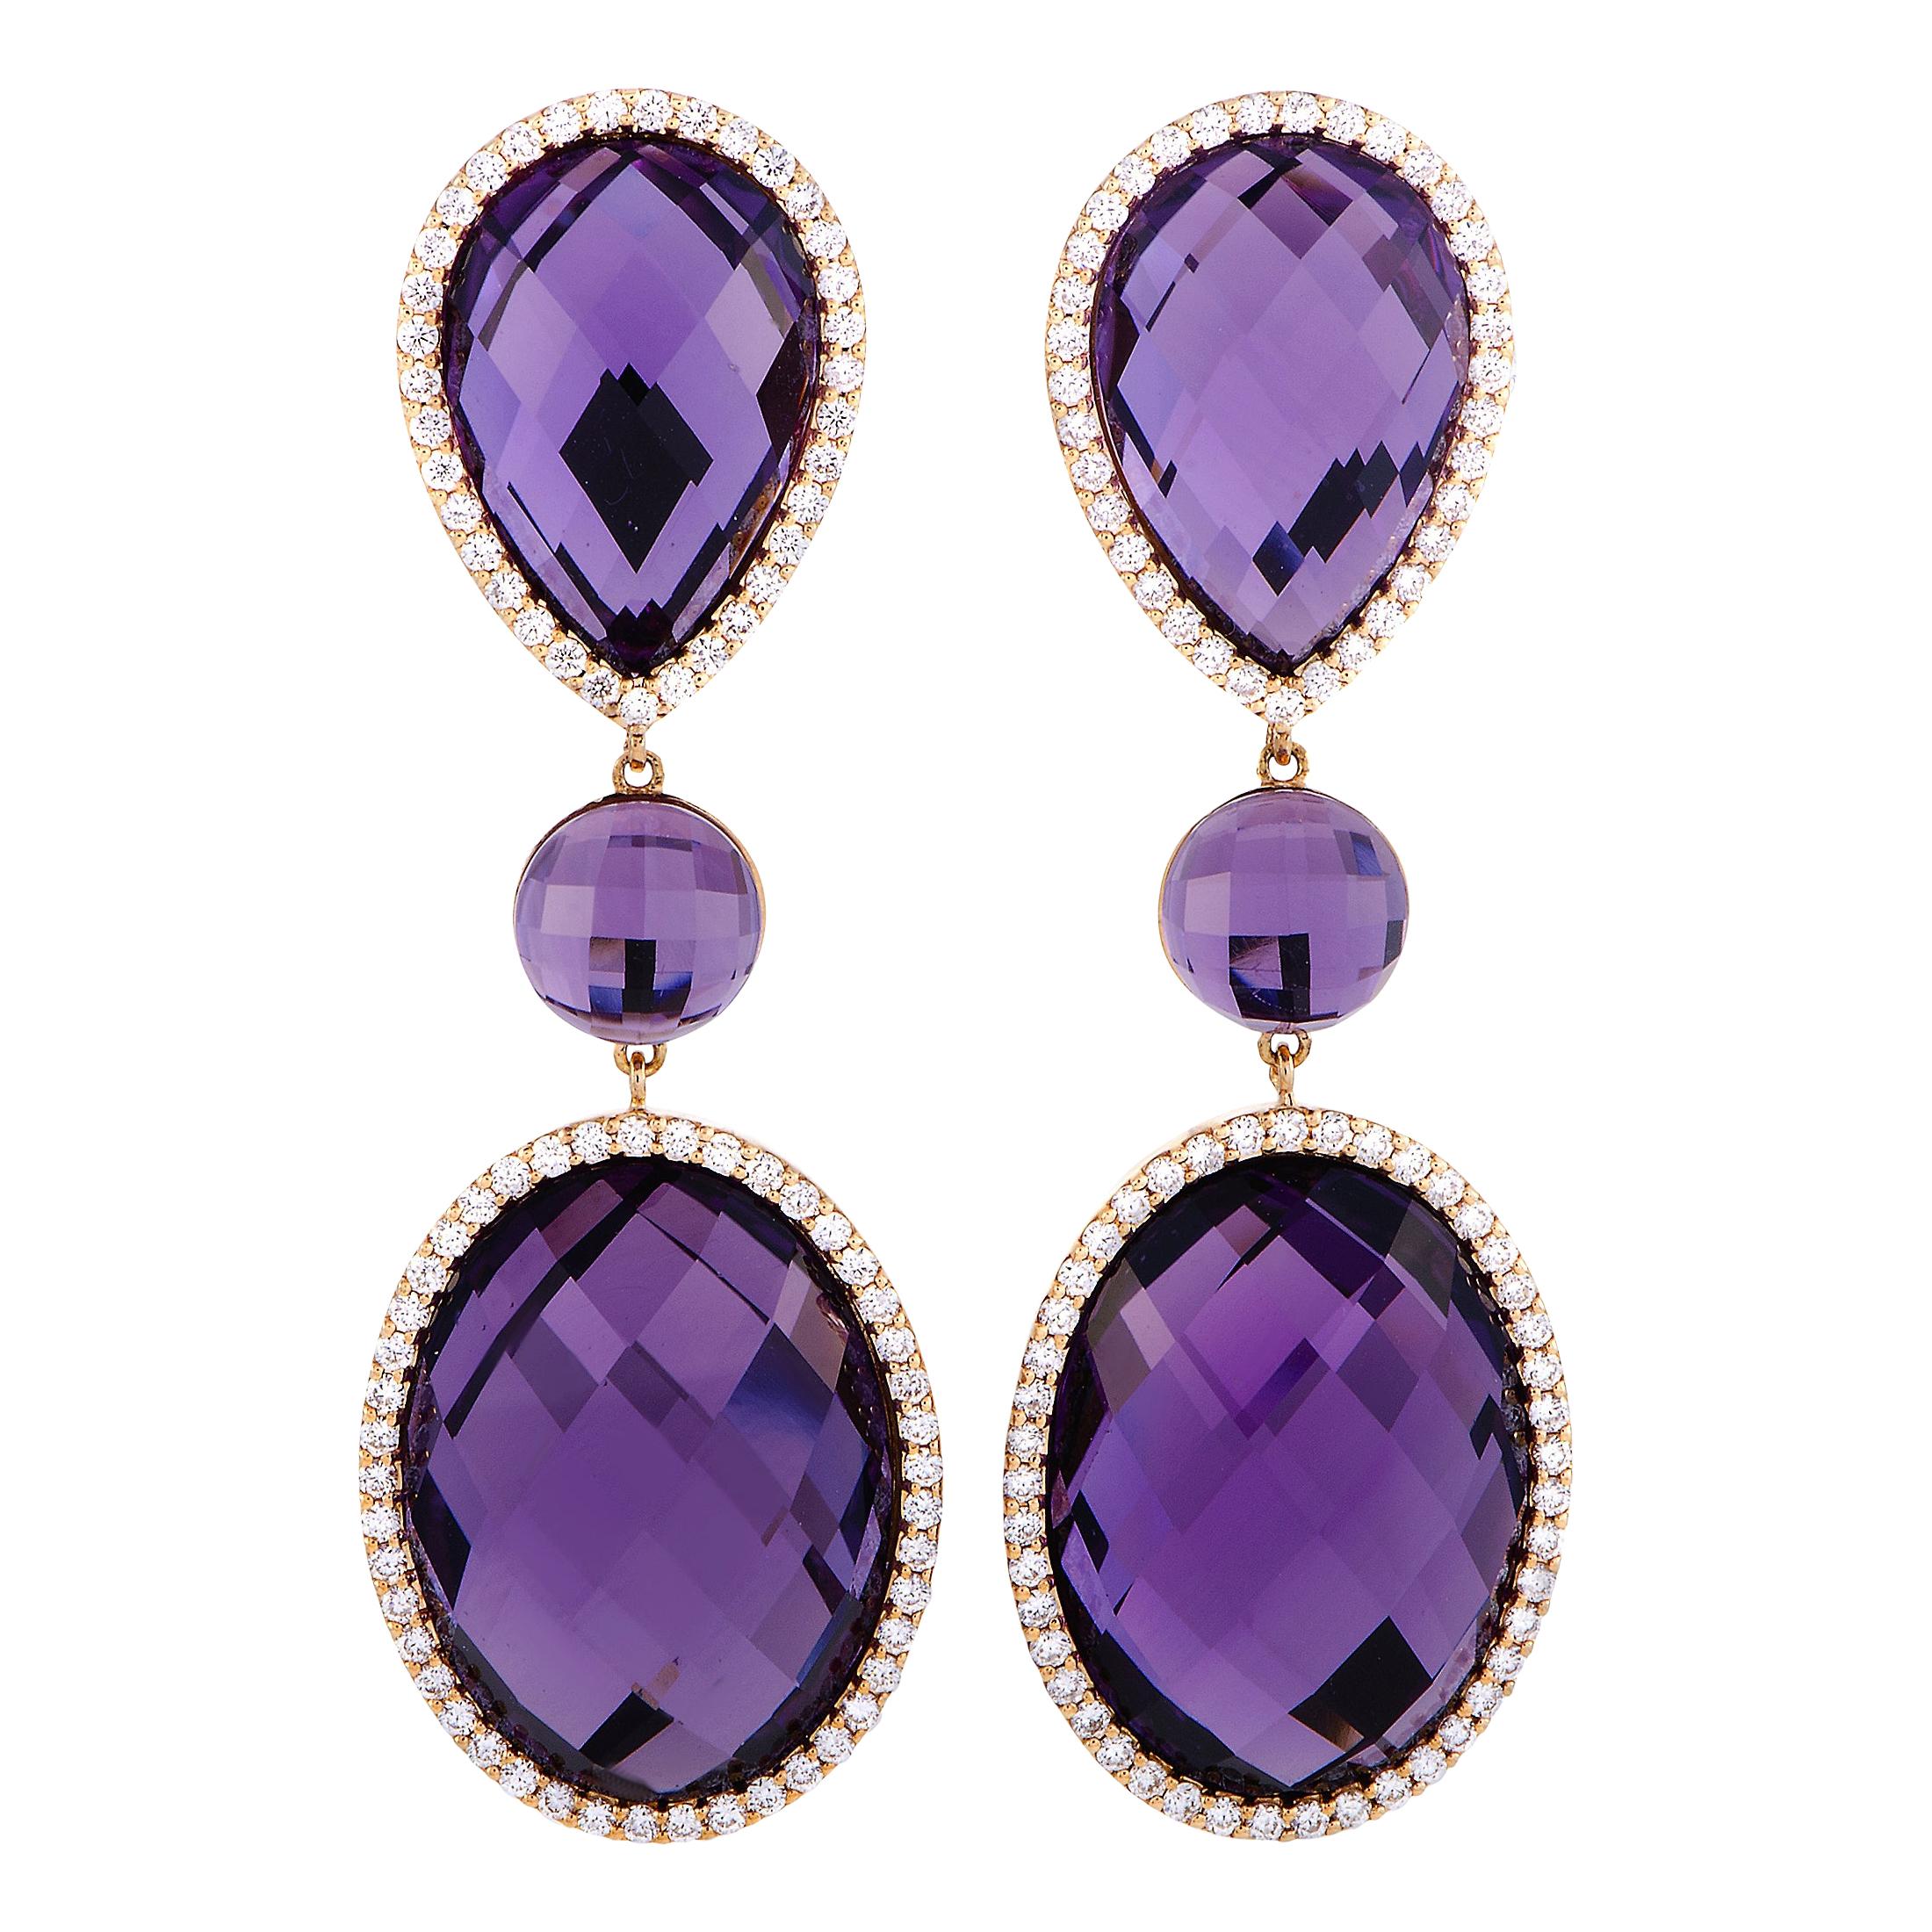 Roberto Coin 18K Rose and White Gold Diamond and Amethyst Oval Drop Earrings